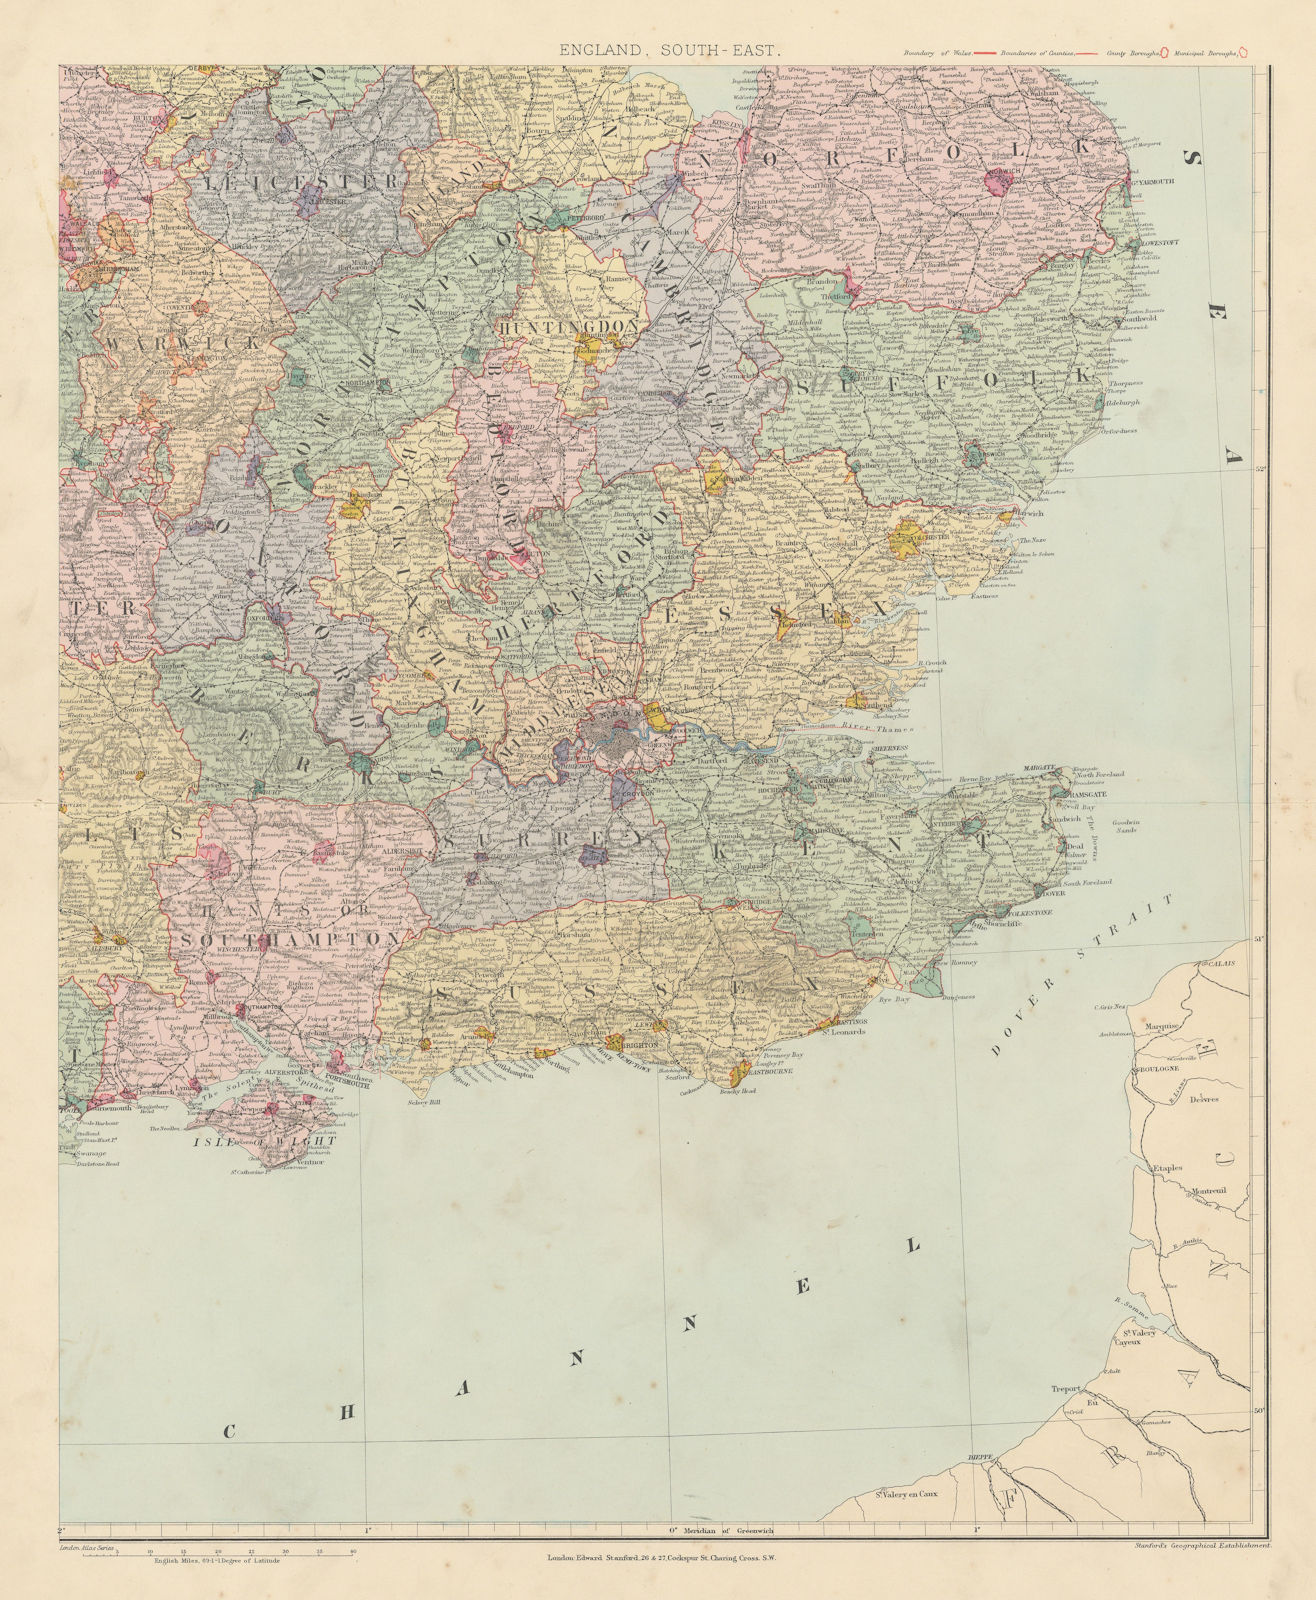 South east England. Counties & boroughs. Large 61x50cm. STANFORD 1894 old map